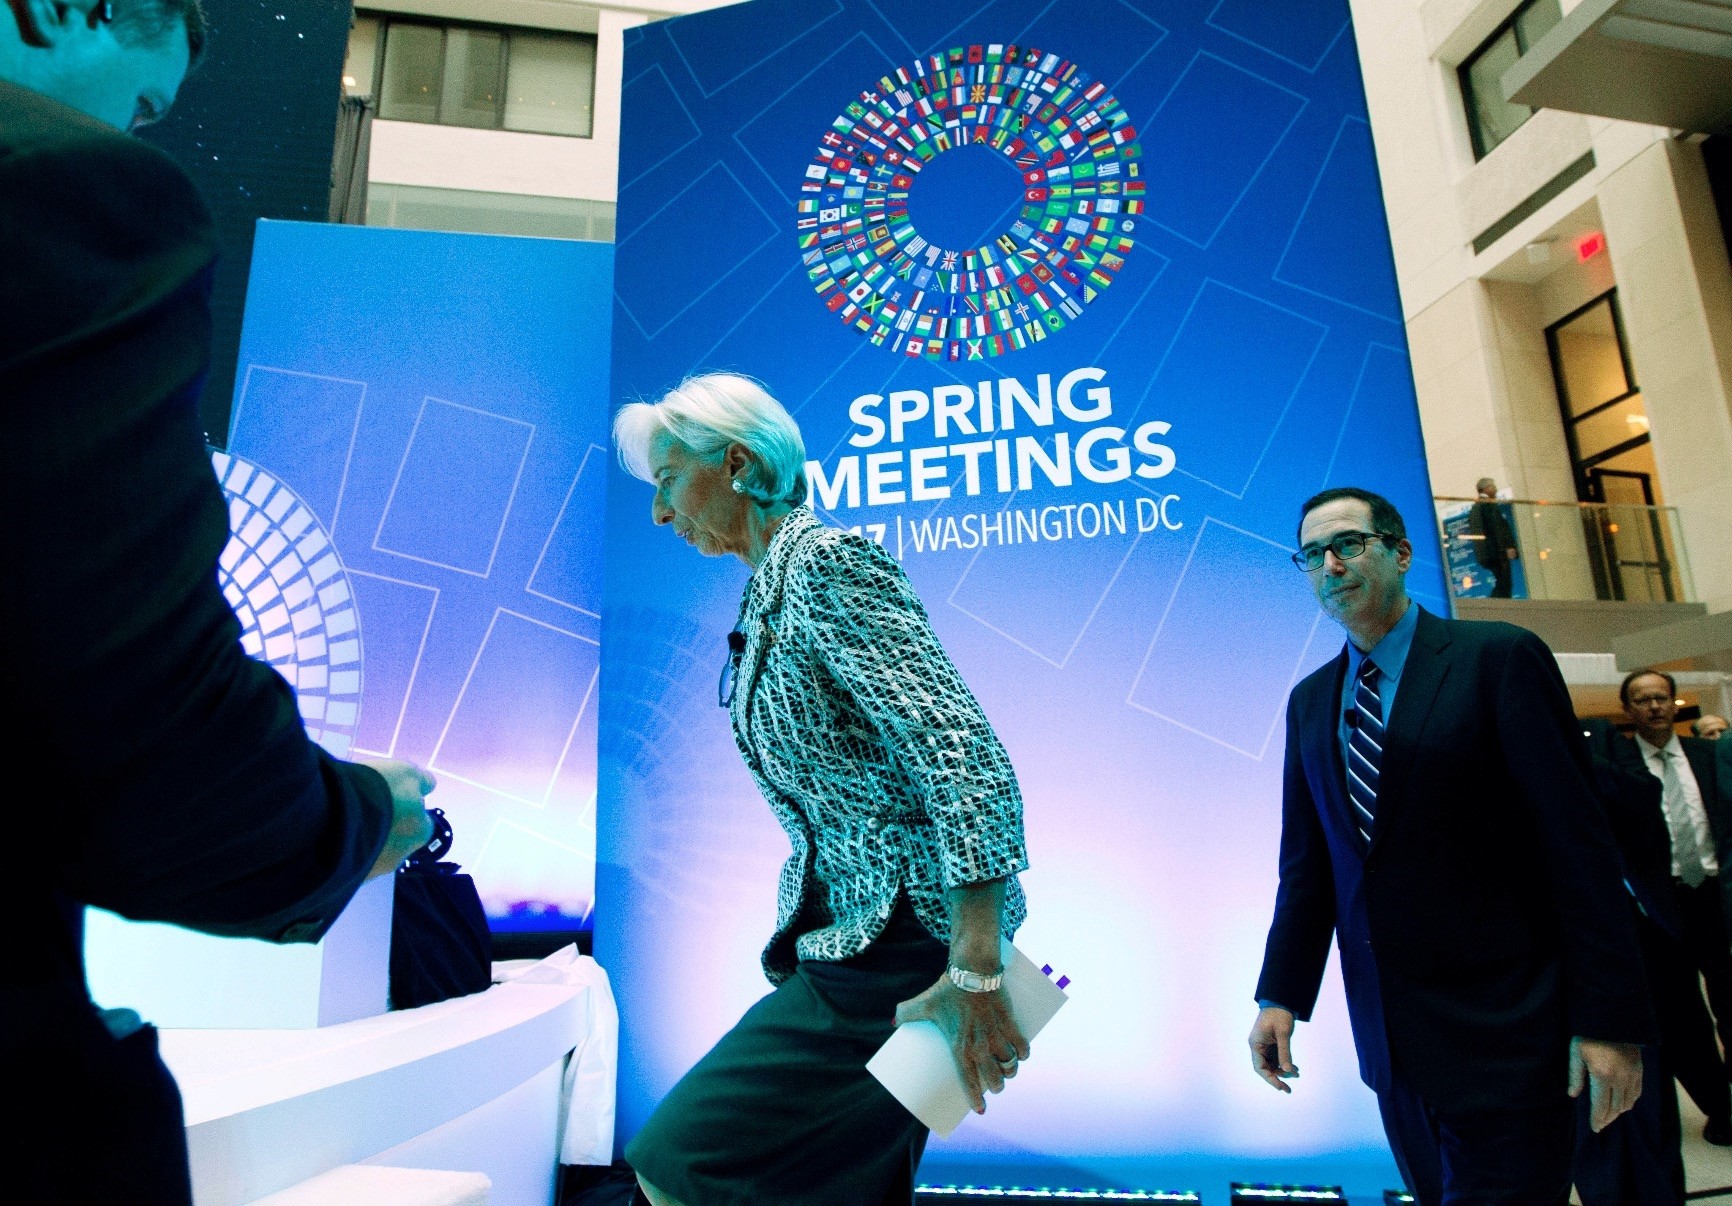 International Monetary Fund Managing Director Christine Lagarde and U.S. Treasury Secretary Steven Mnuchin arrive for a discussion on the U.S. economy during the World Bank/IMF Spring Meetings in Washington.